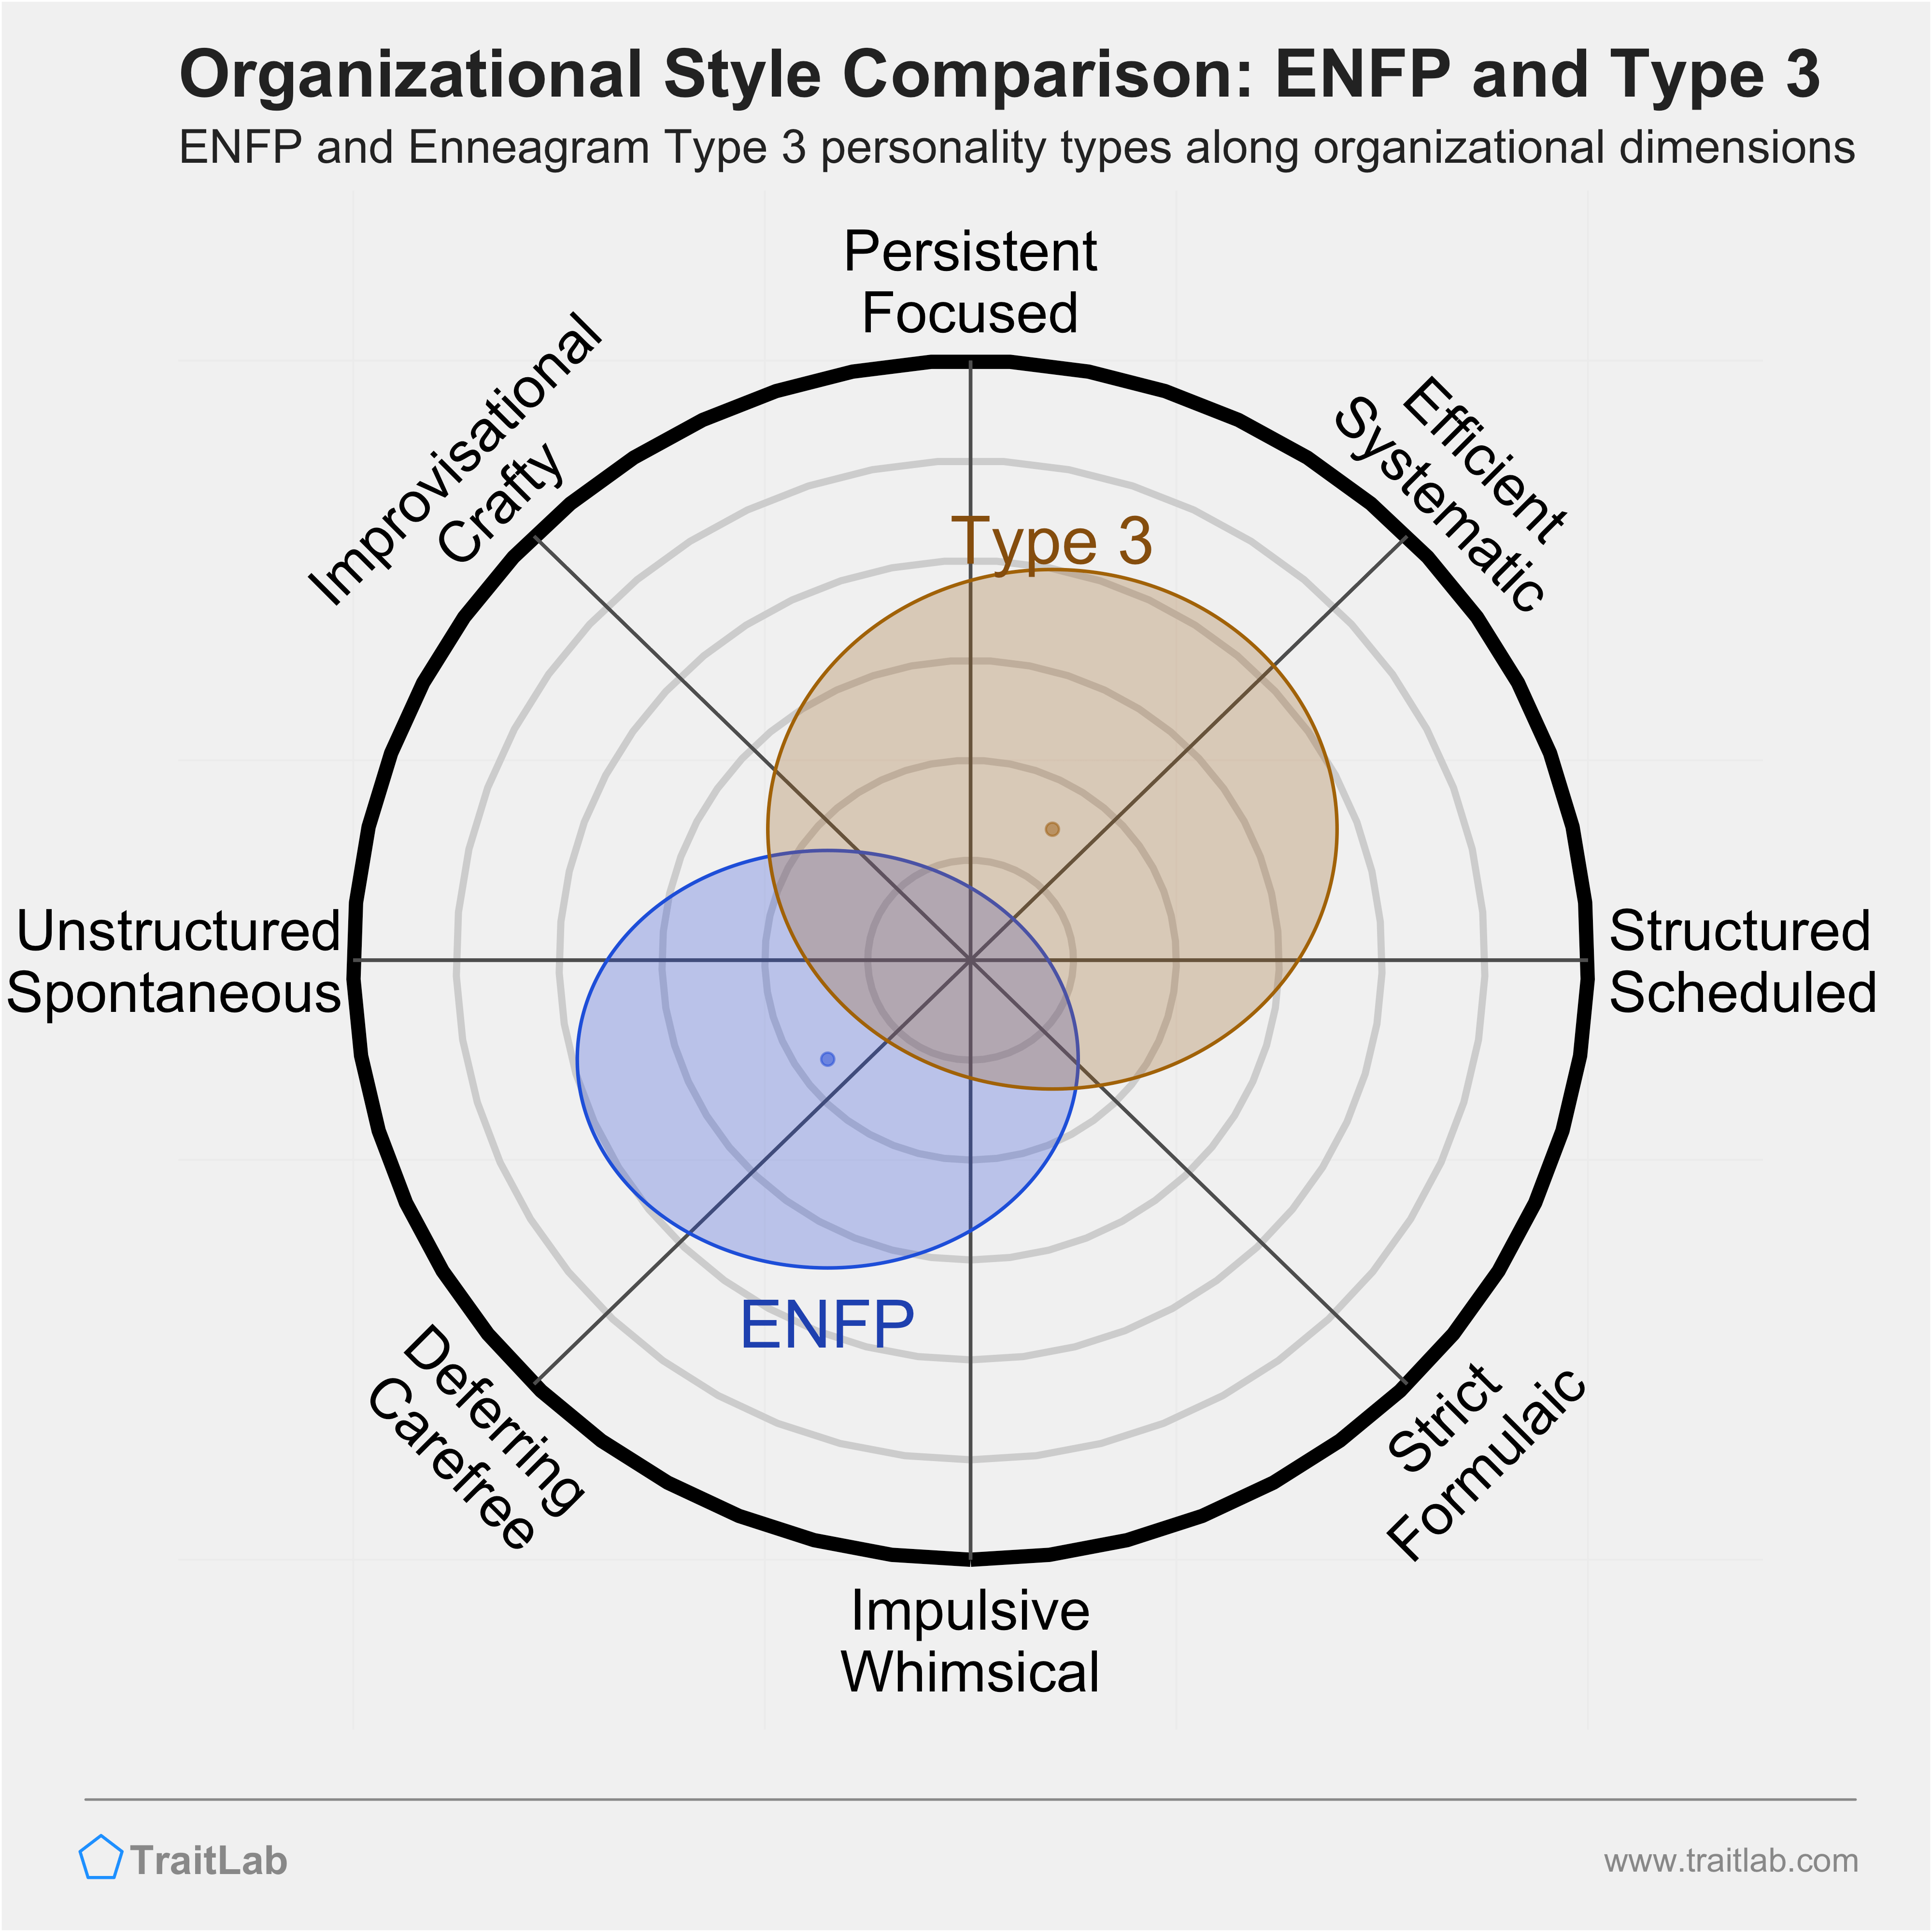 ENFP and Type 3 comparison across organizational dimensions